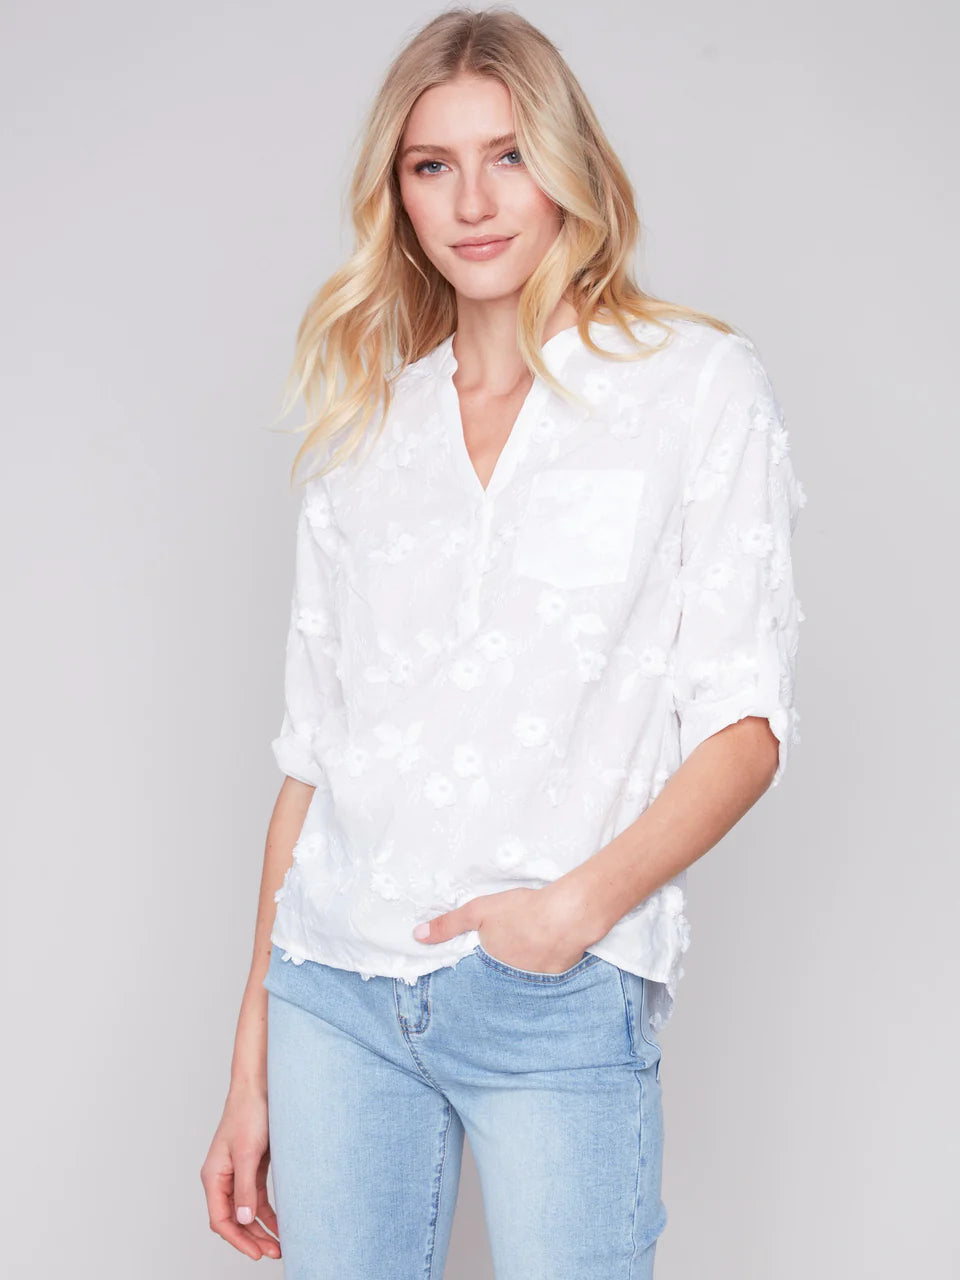 CHARLIE B BLOUSE W/ EMBROIDERY - WHITE - C4188RR887B002